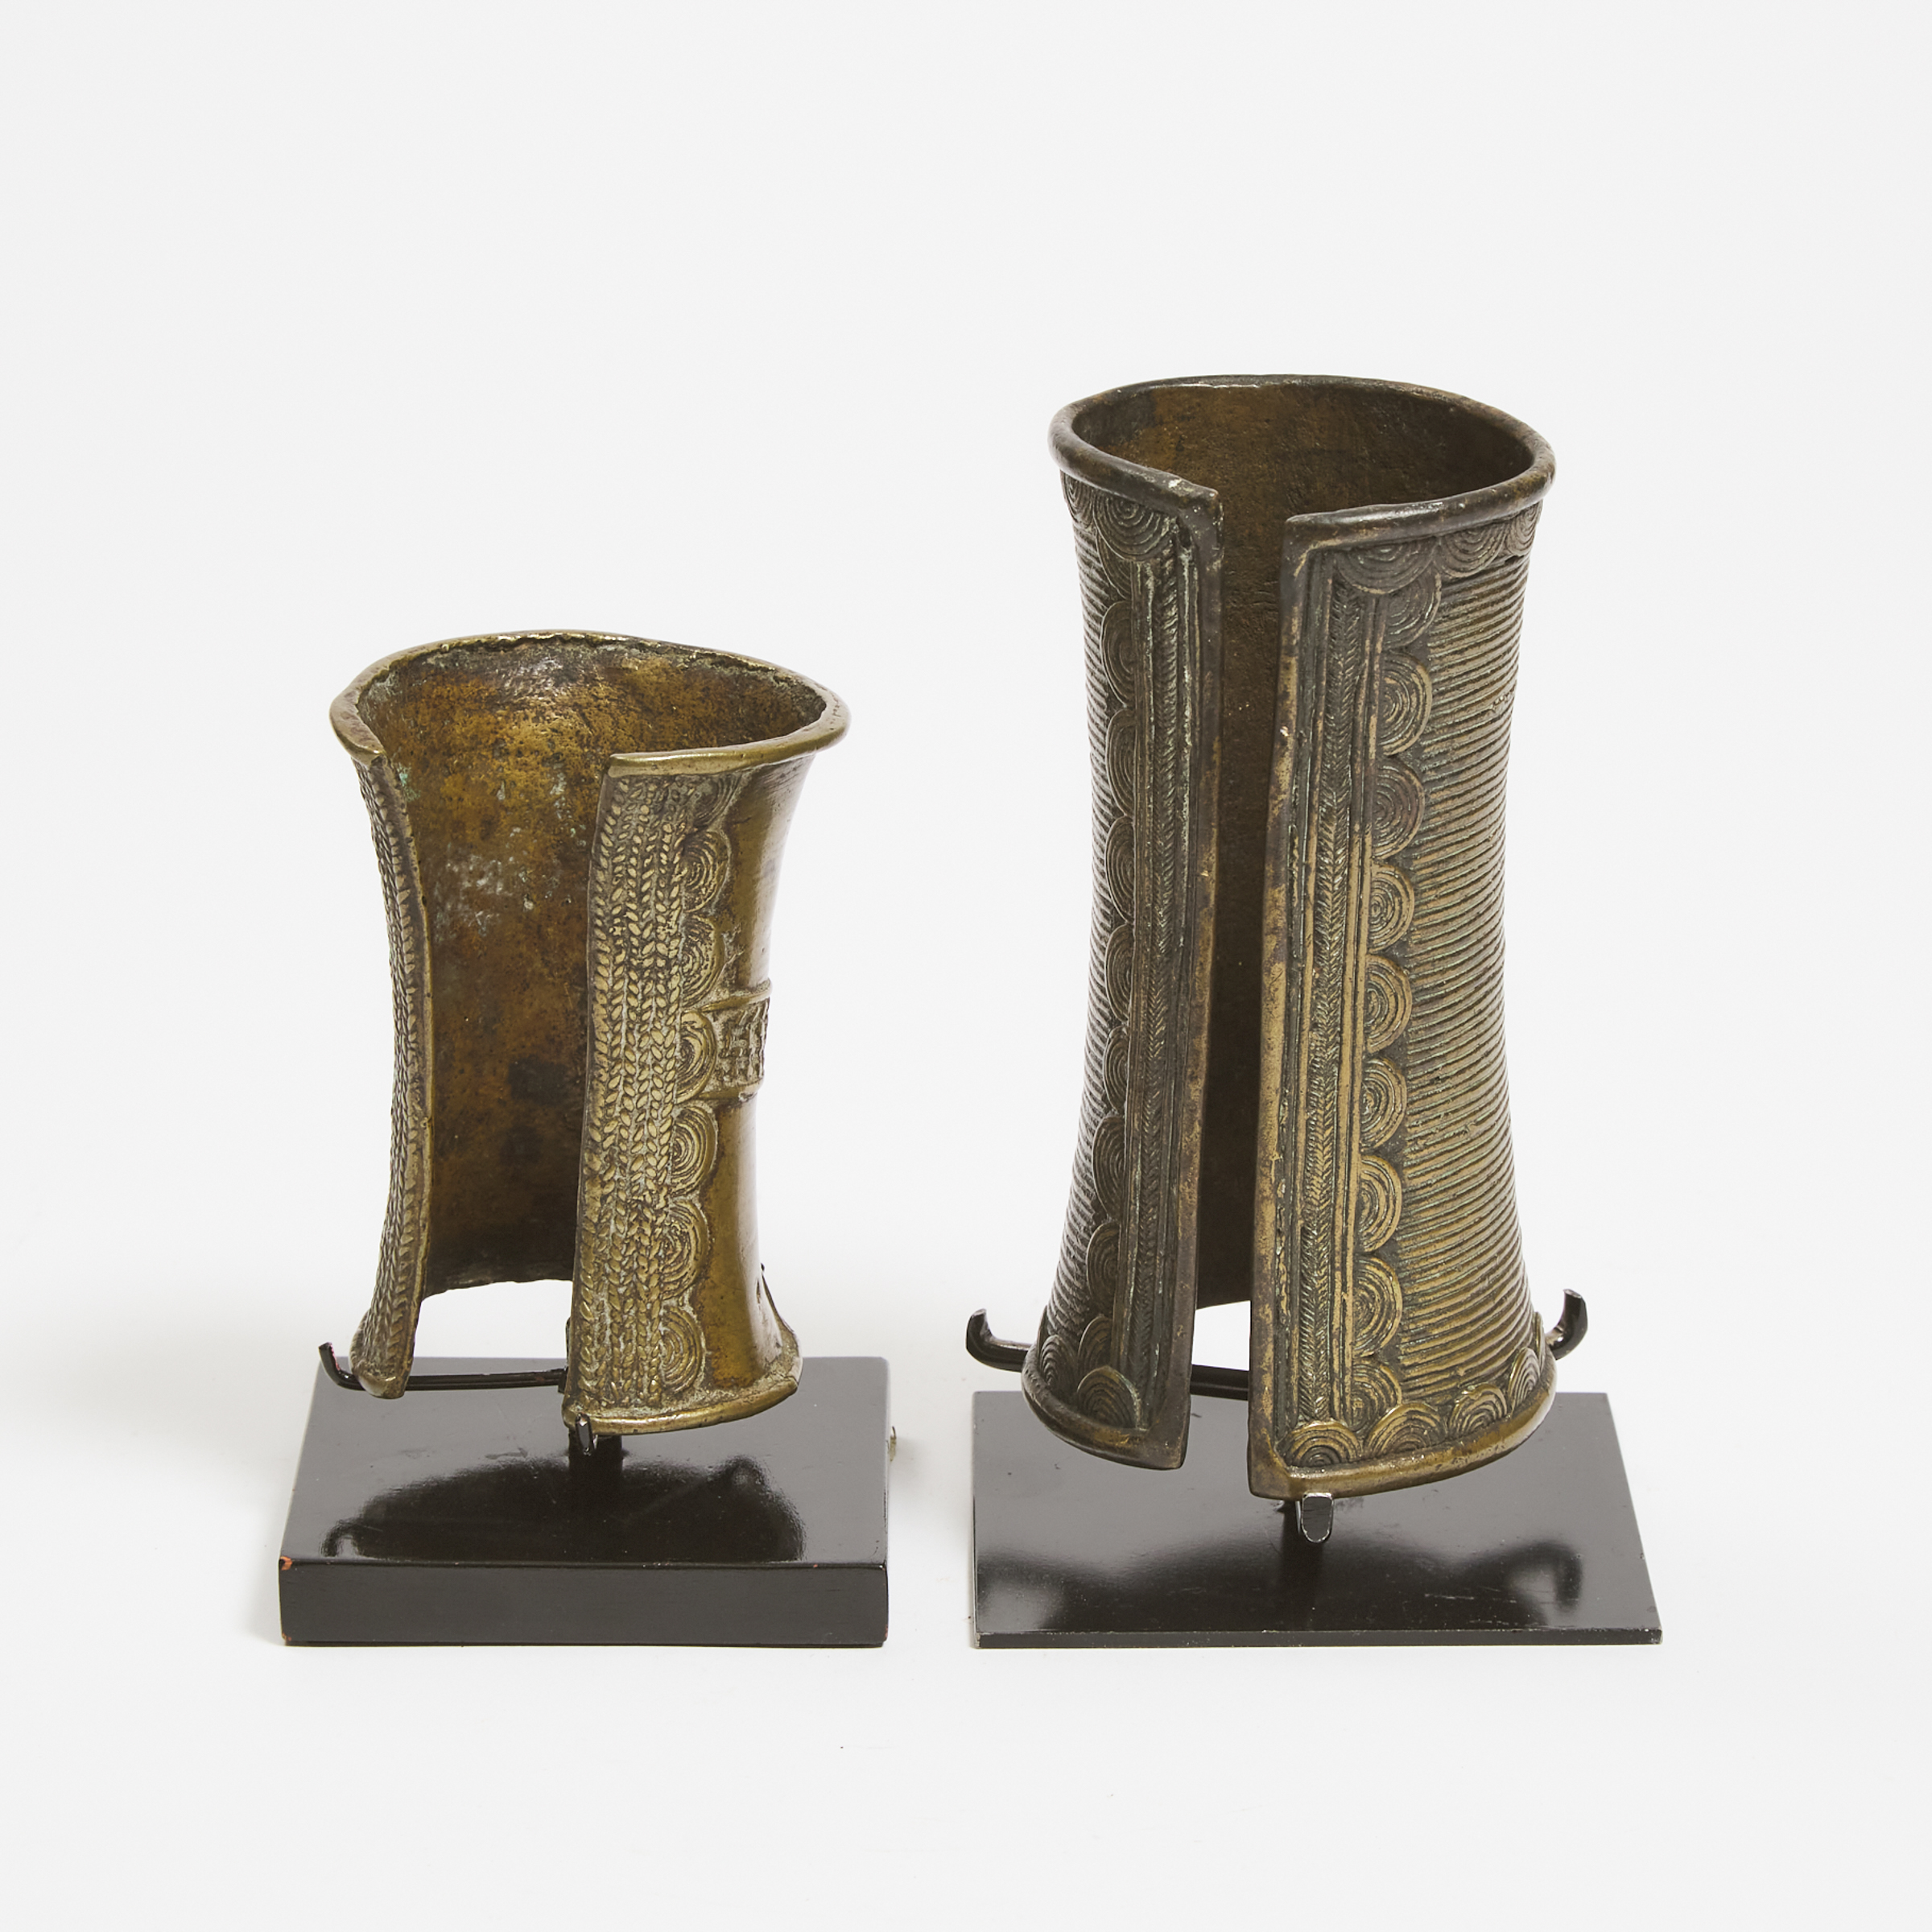 Two West African Bronze Ankle/Wrist Cuffs, possibly Gurunsi, Ghana/Burkina Faso, late 19th to early 20th century